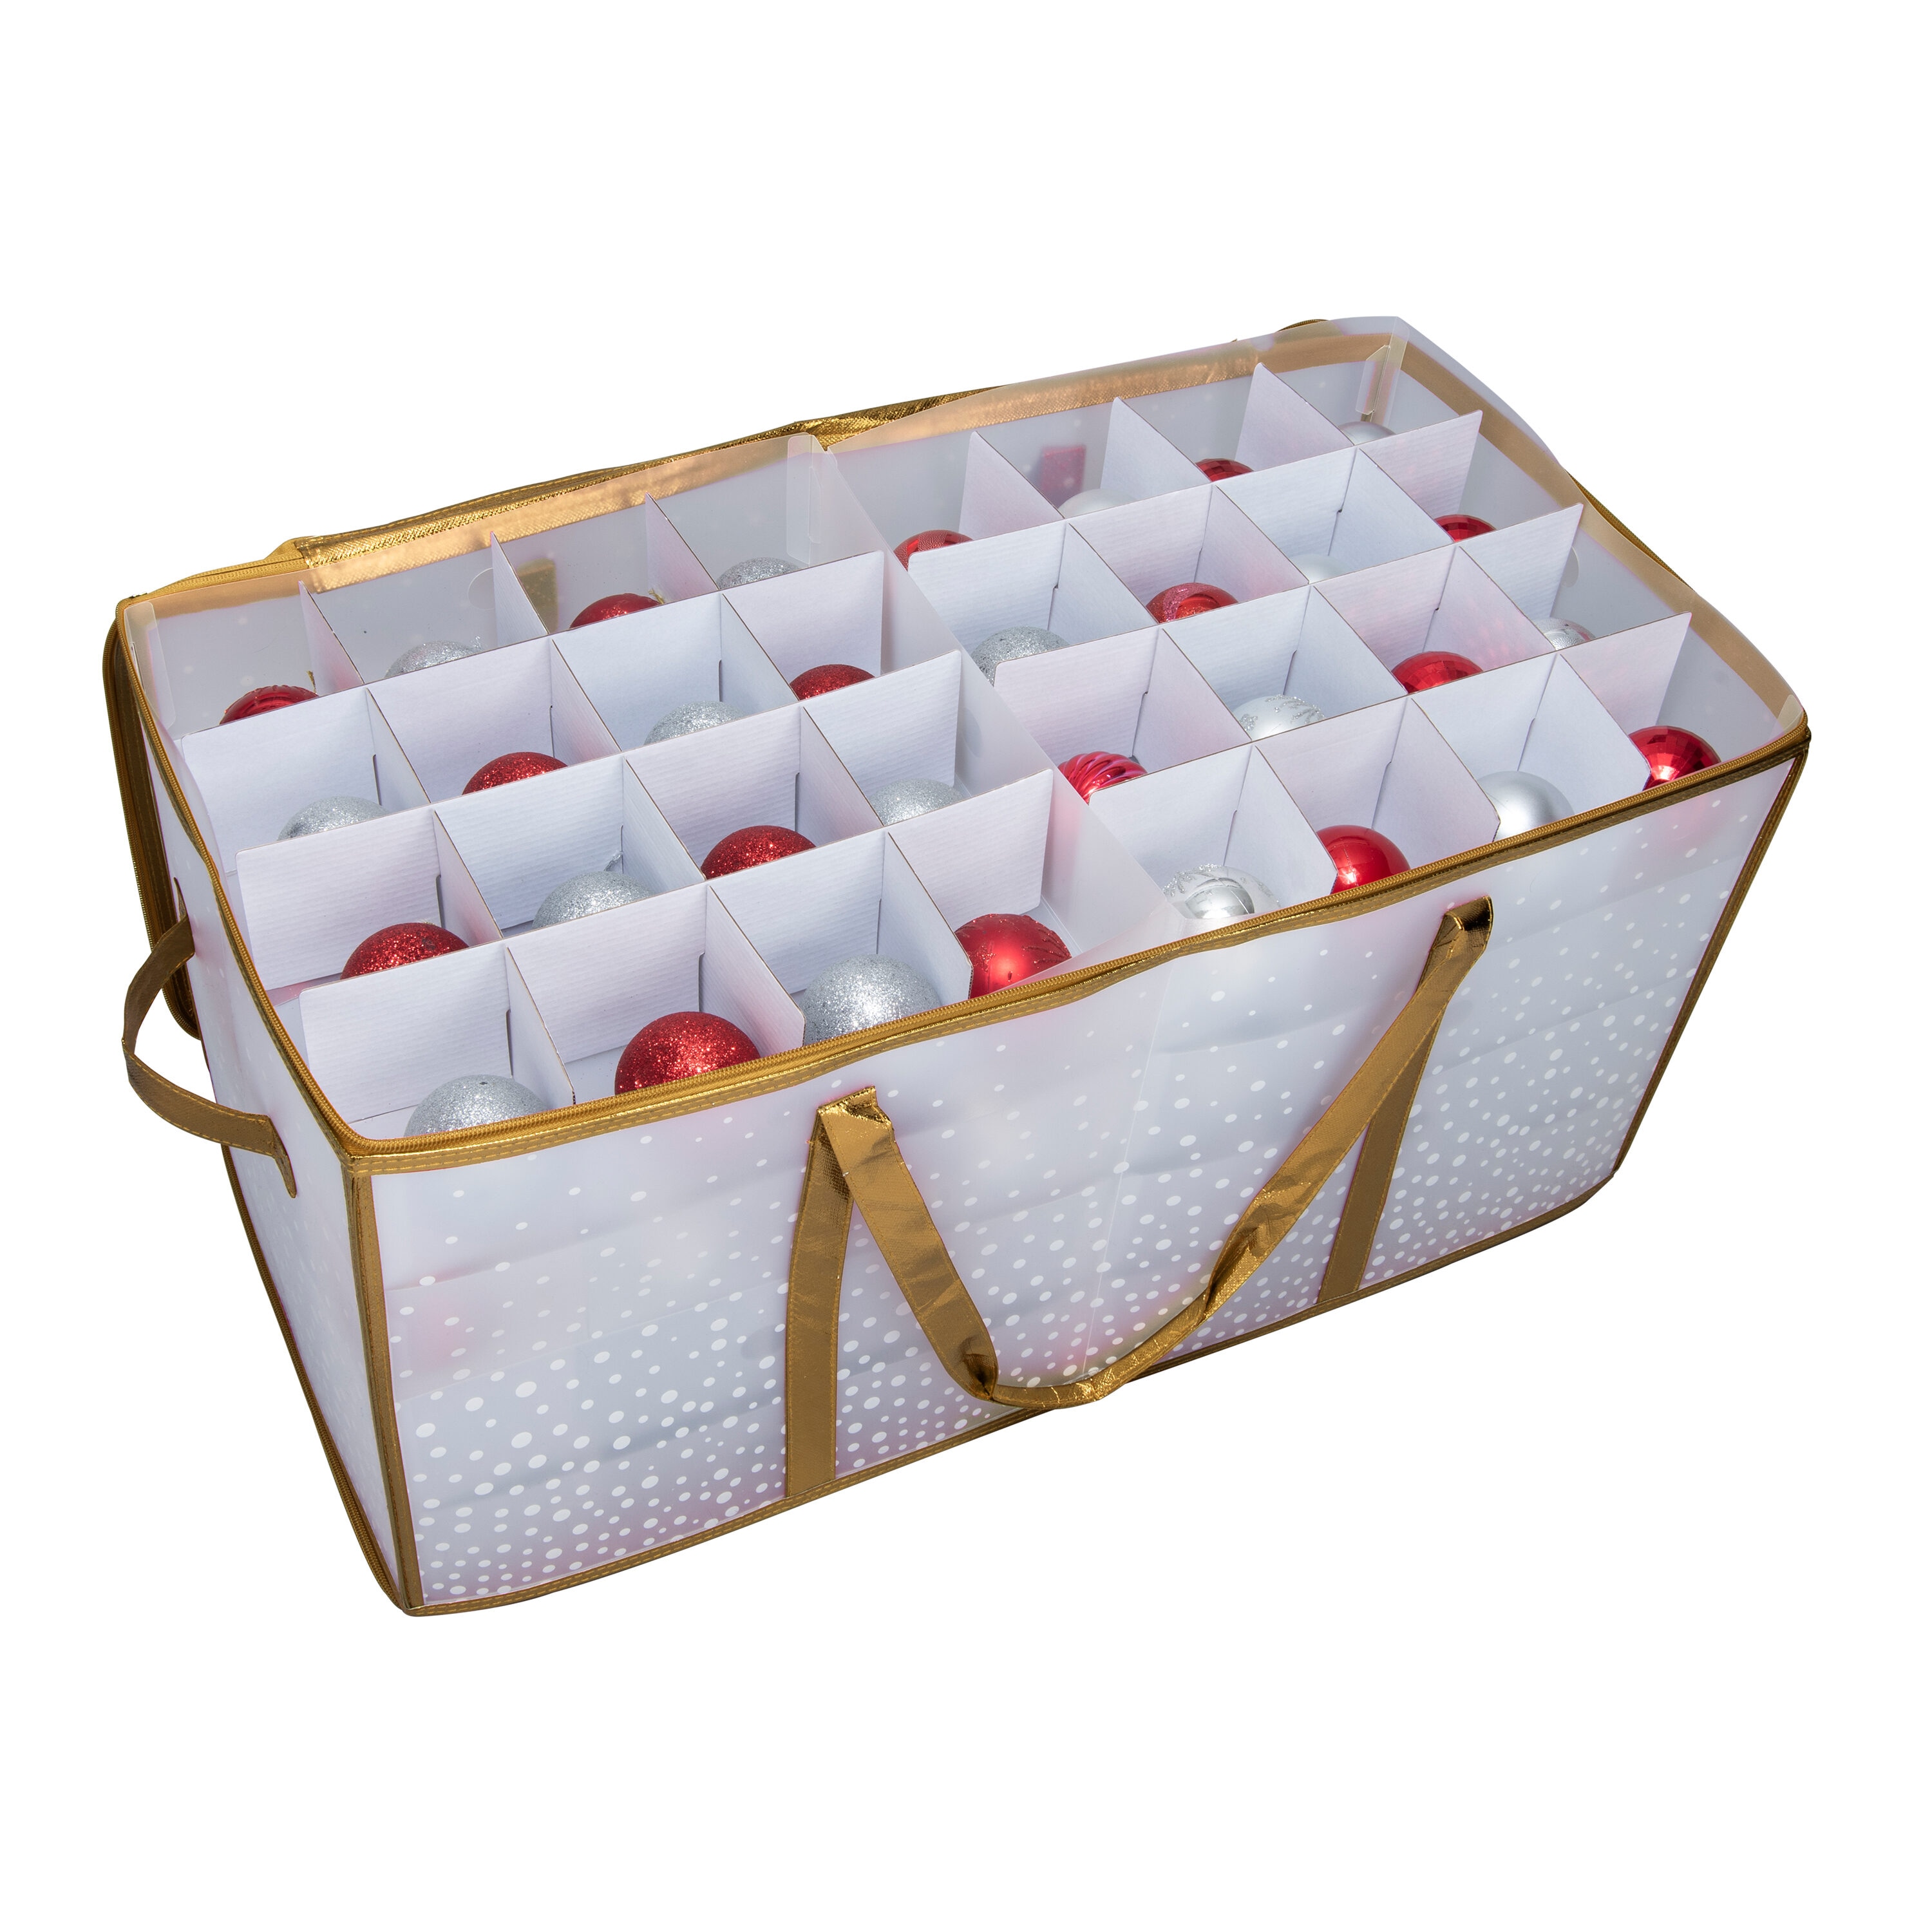 The Popular Zober Two-in-One Christmas Ornament Storage Box Is